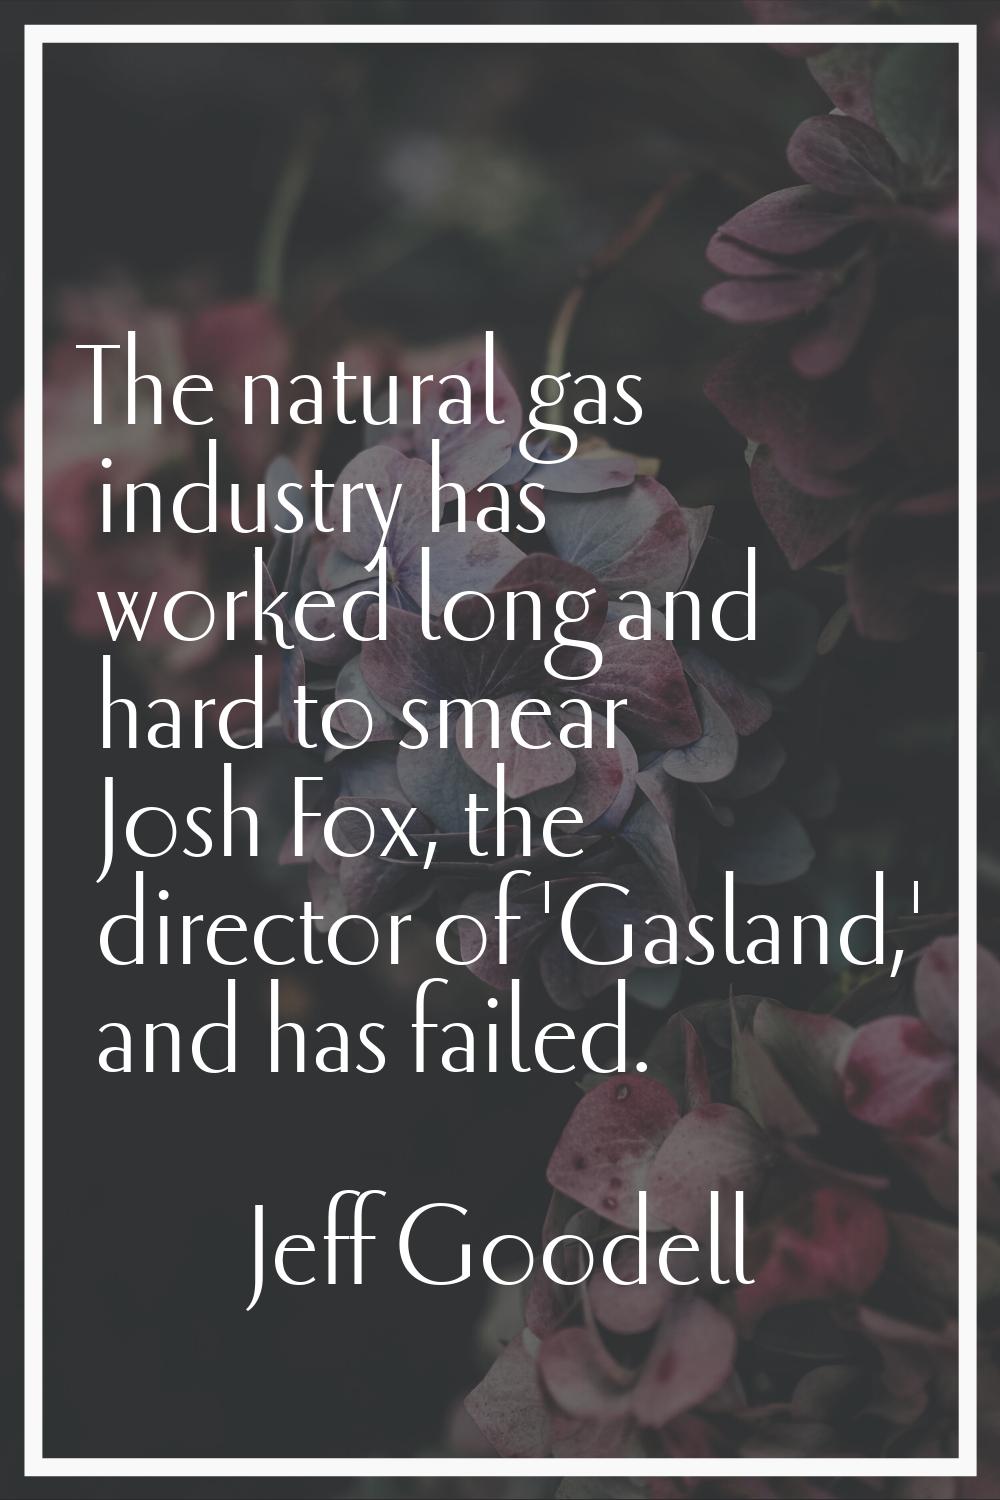 The natural gas industry has worked long and hard to smear Josh Fox, the director of 'Gasland,' and